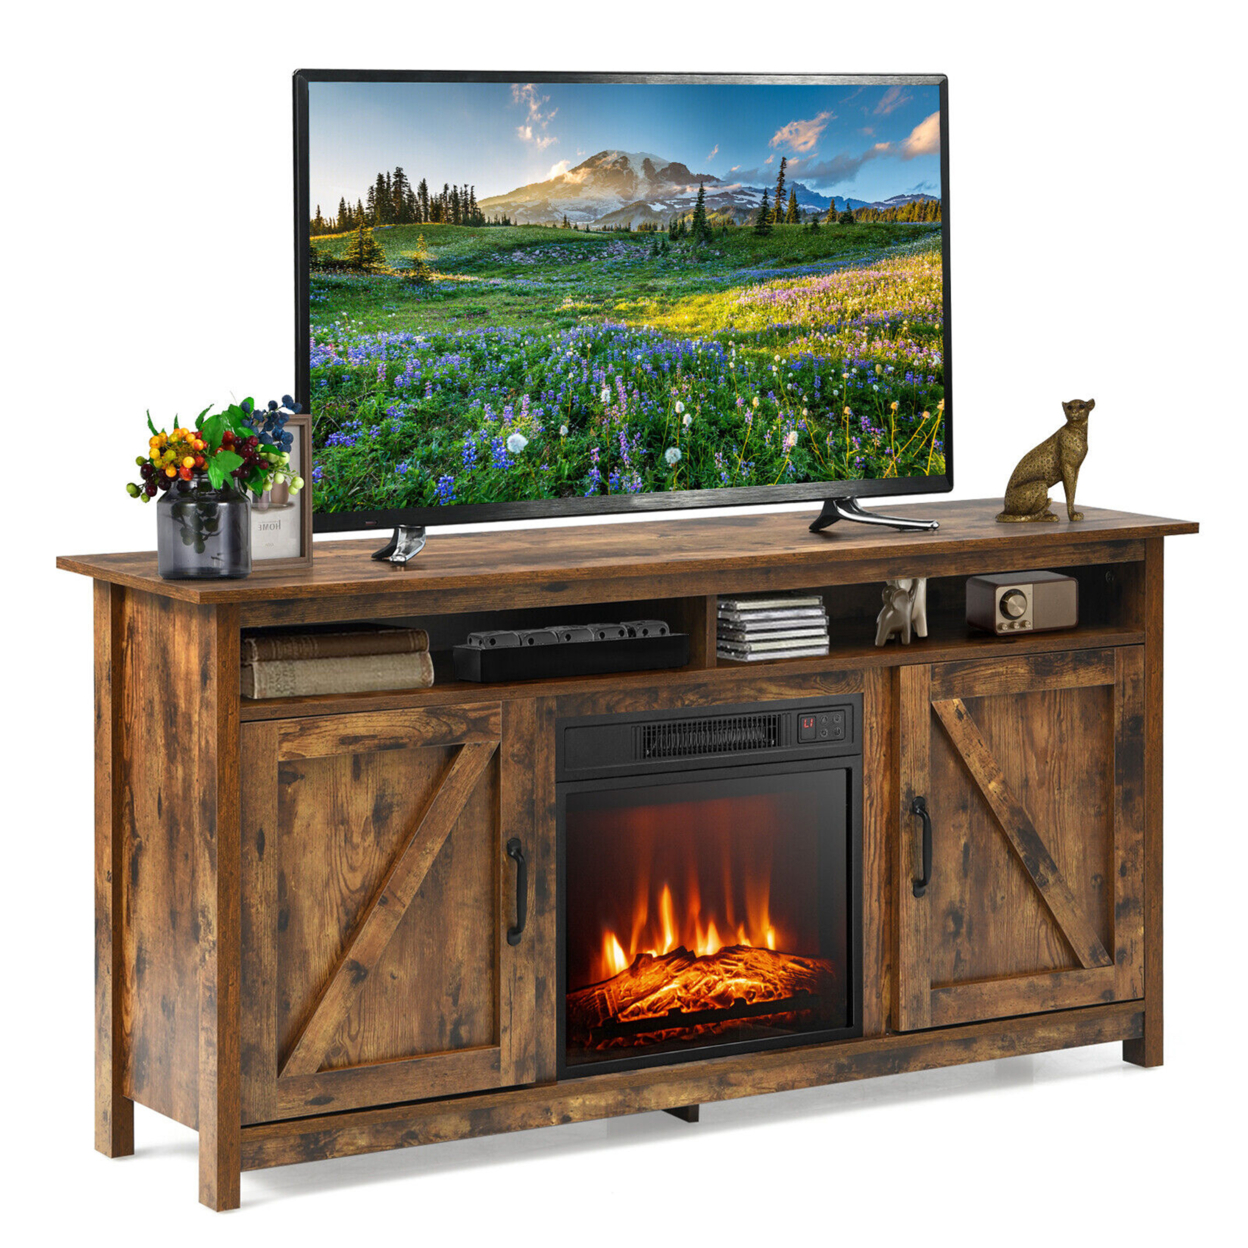 60'' Industrial Fireplace TV Stand W/ 18'' 1400W Electric Fireplace